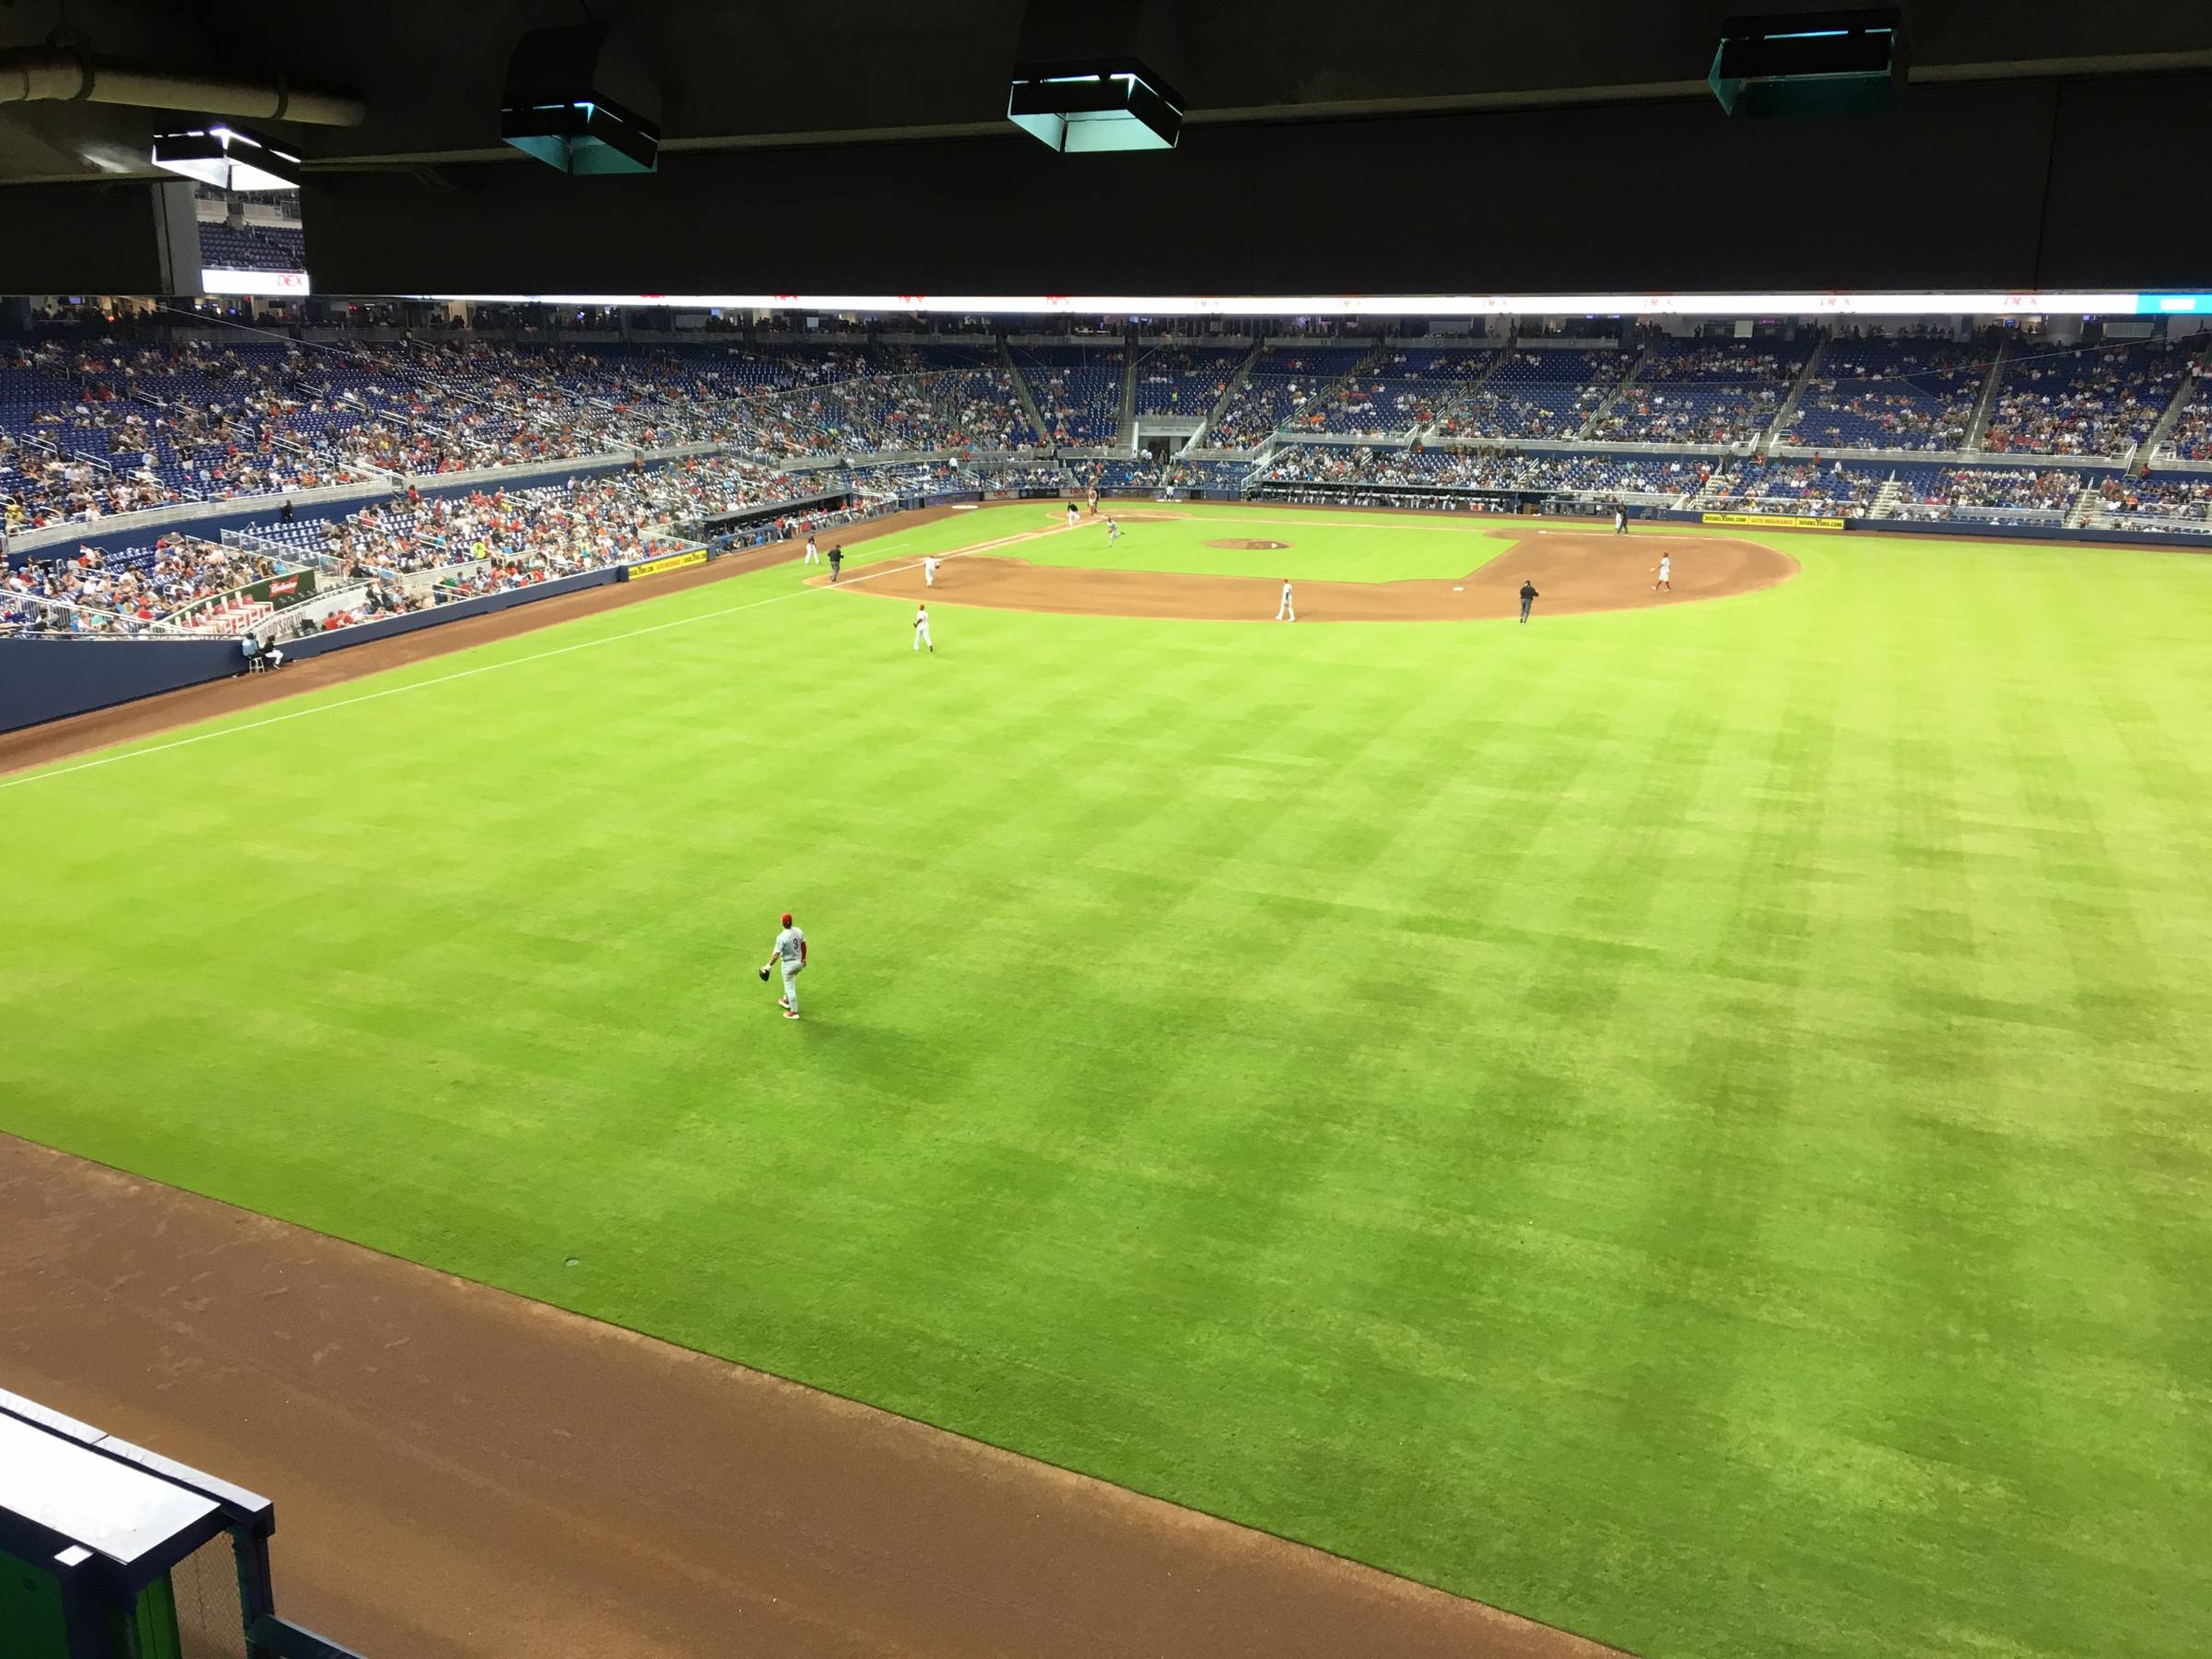 Standing room only section at Marlins Park